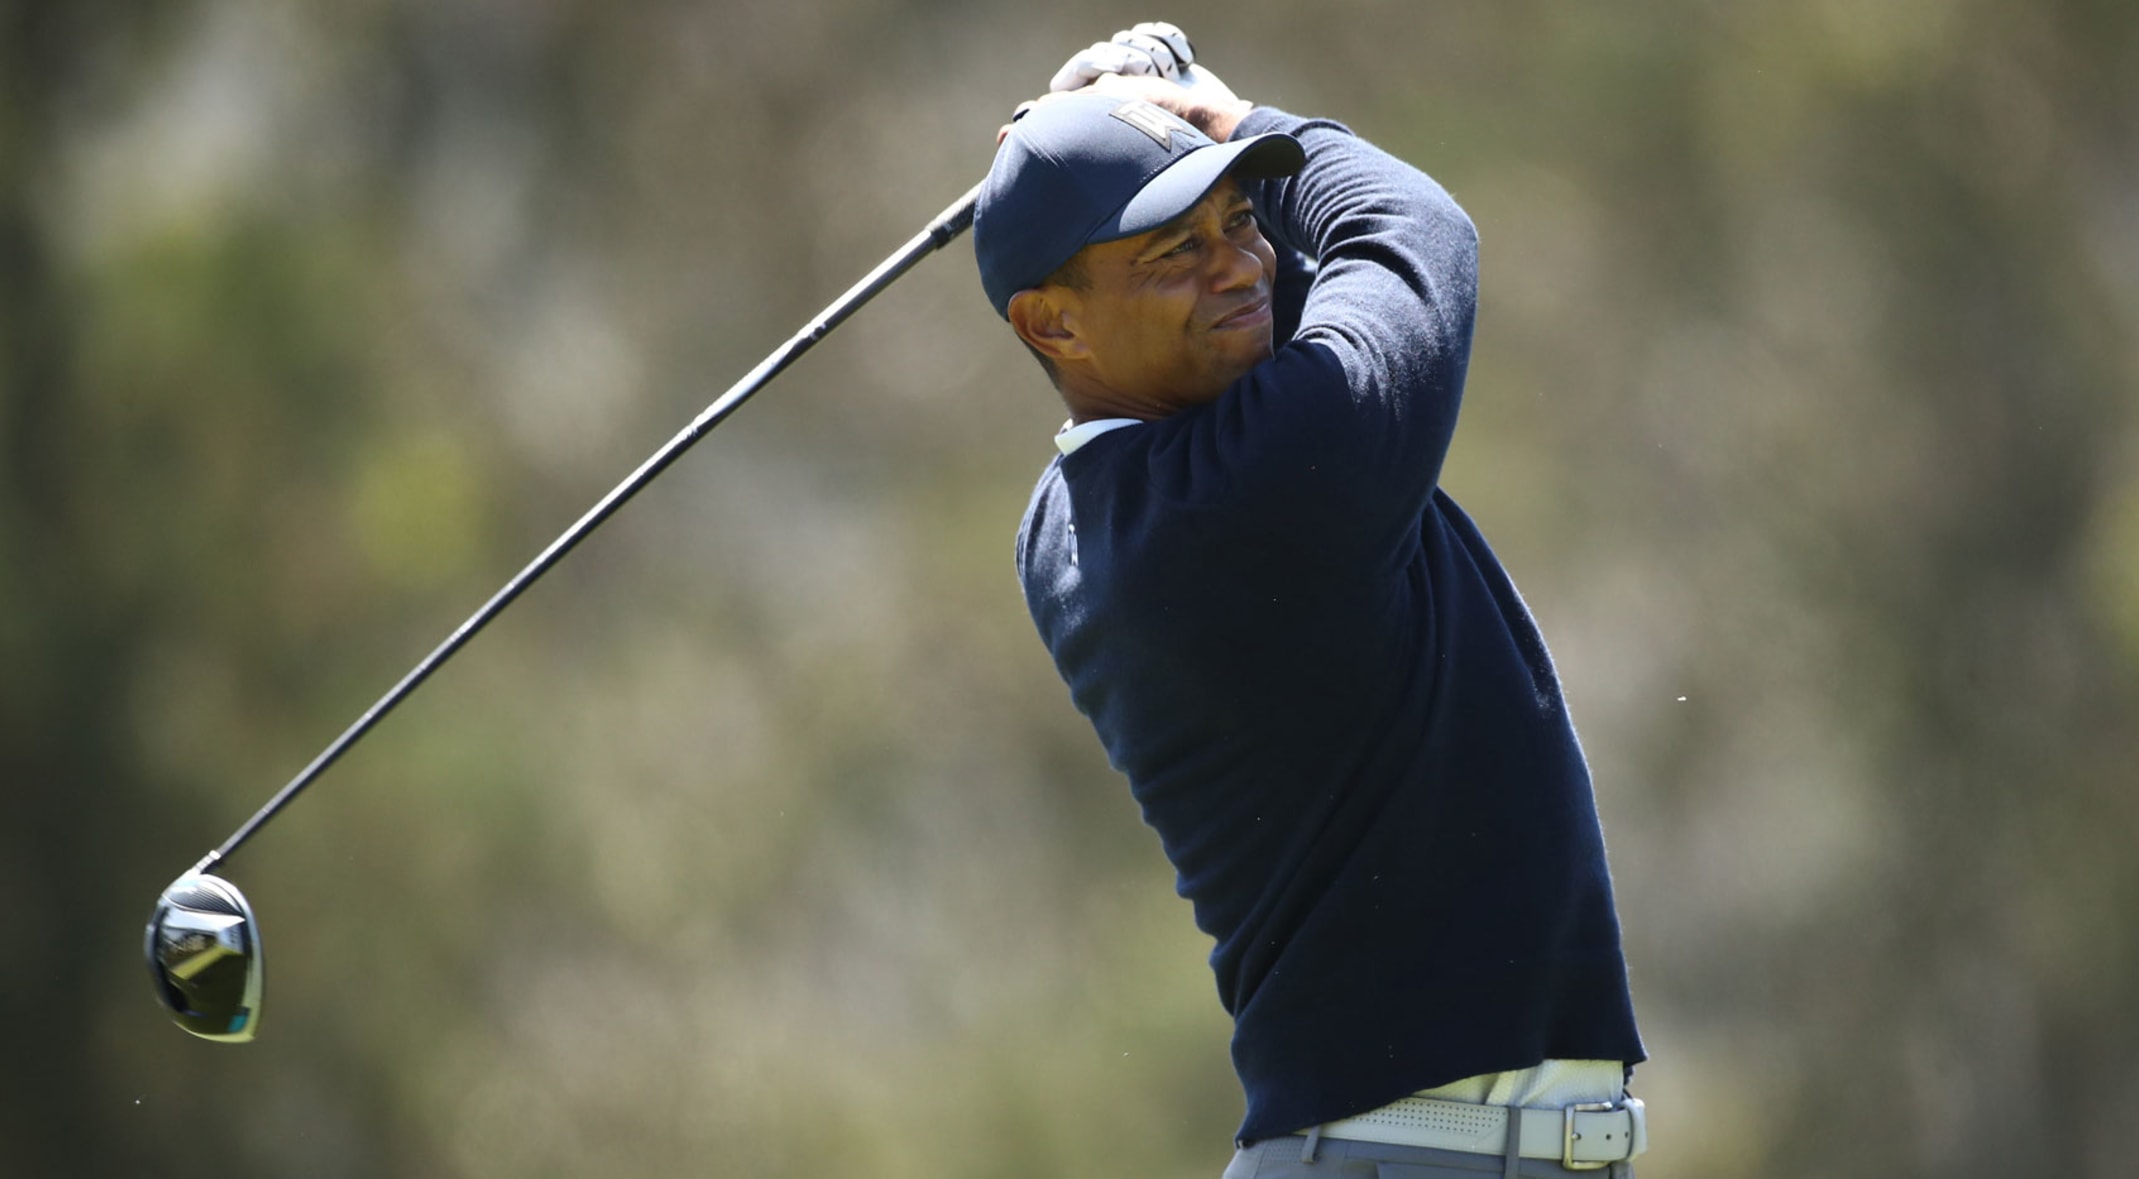 Tiger Woods Makes Cut After Second Round 72 At Pga Championship